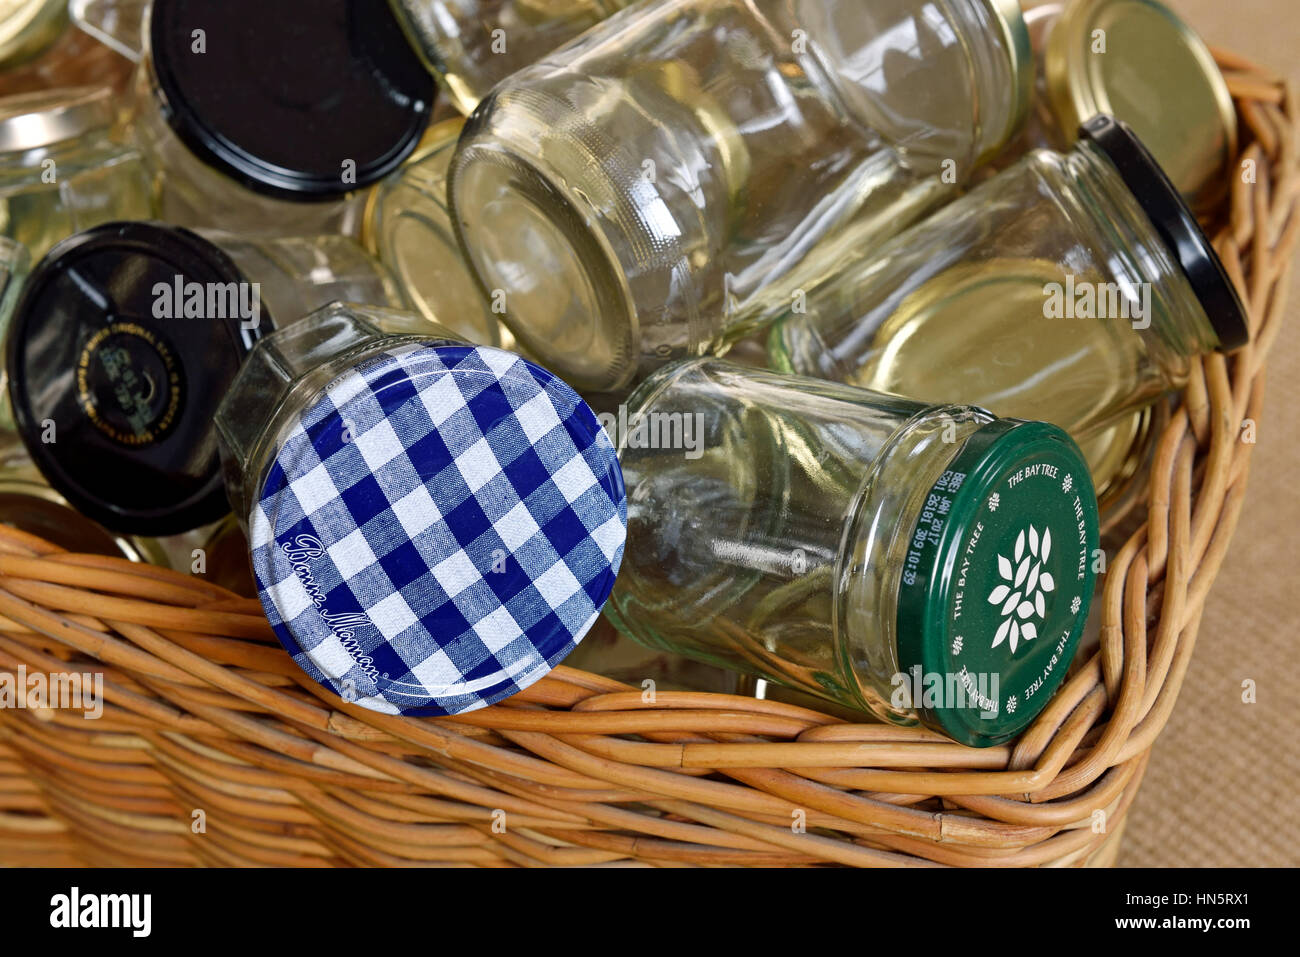 Empty glass jars in basket washed and ready for reuse, storage or recycling, zero waste. Stock Photo